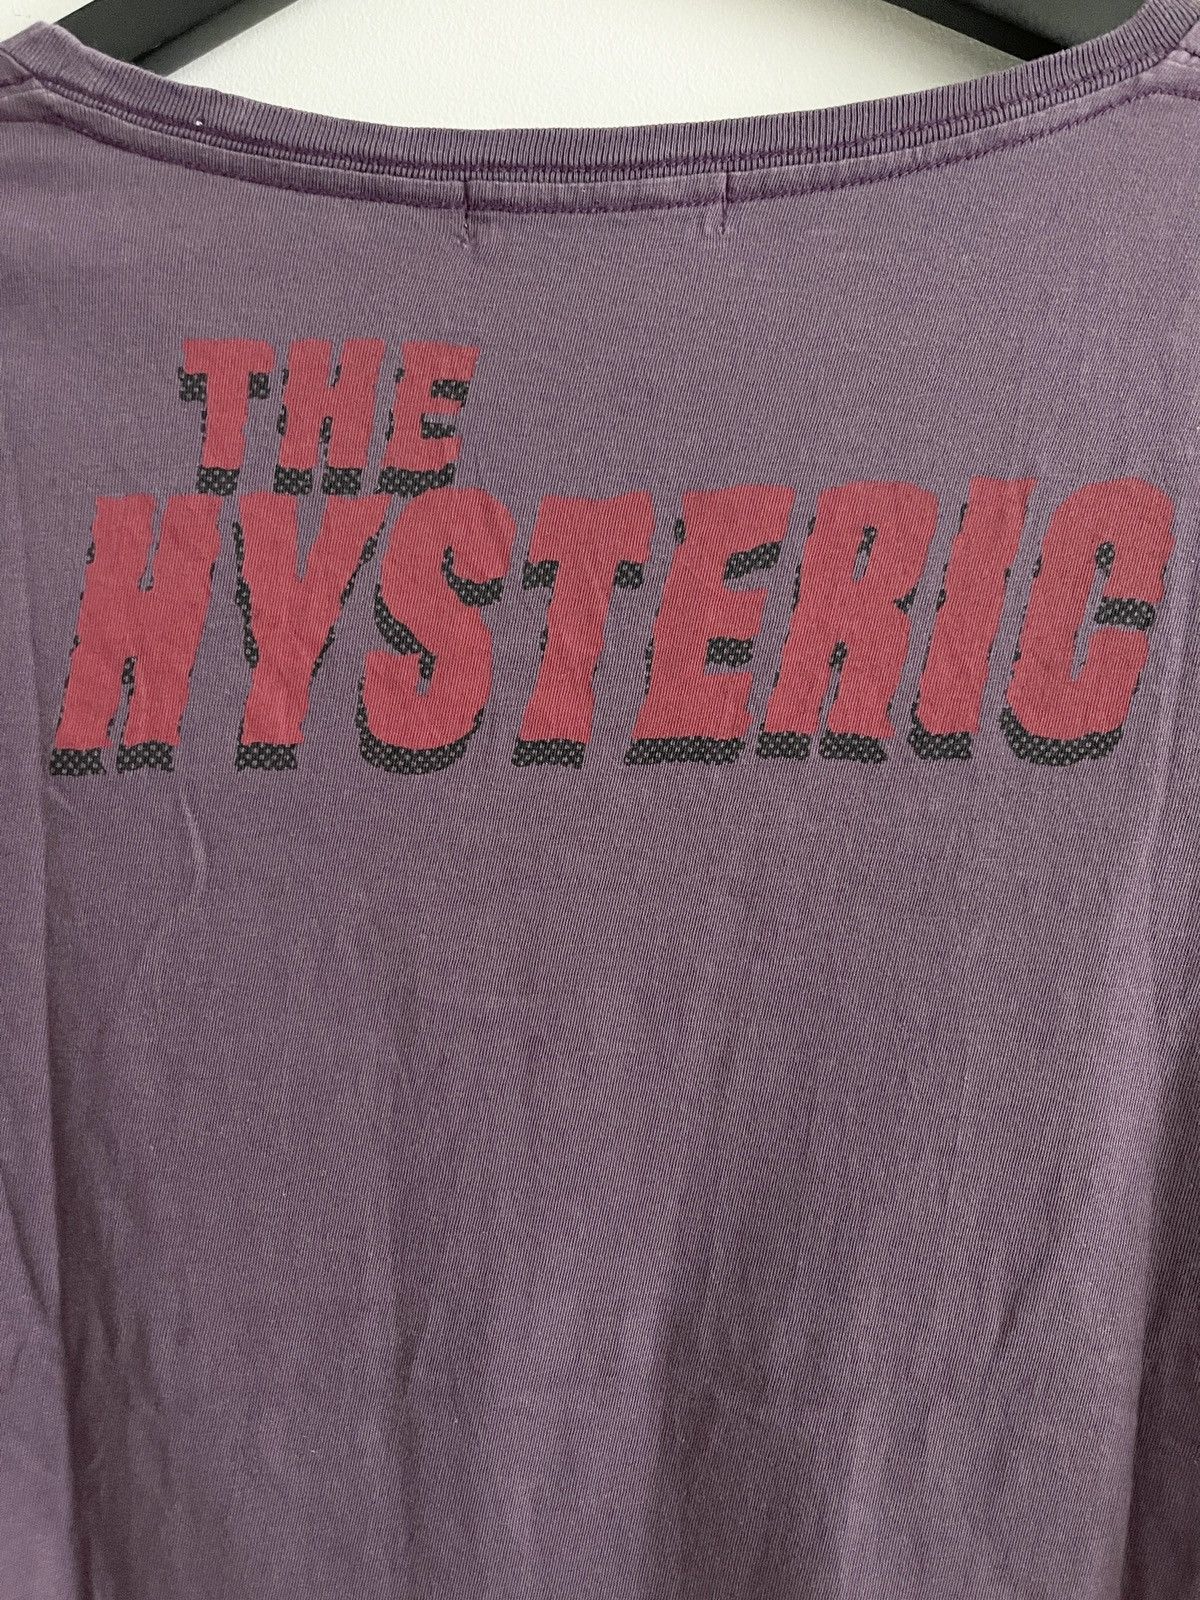 Vintage - STEAL! 2000s Hysteric Glamour Thrills & Delights Girl LS Tee - 5